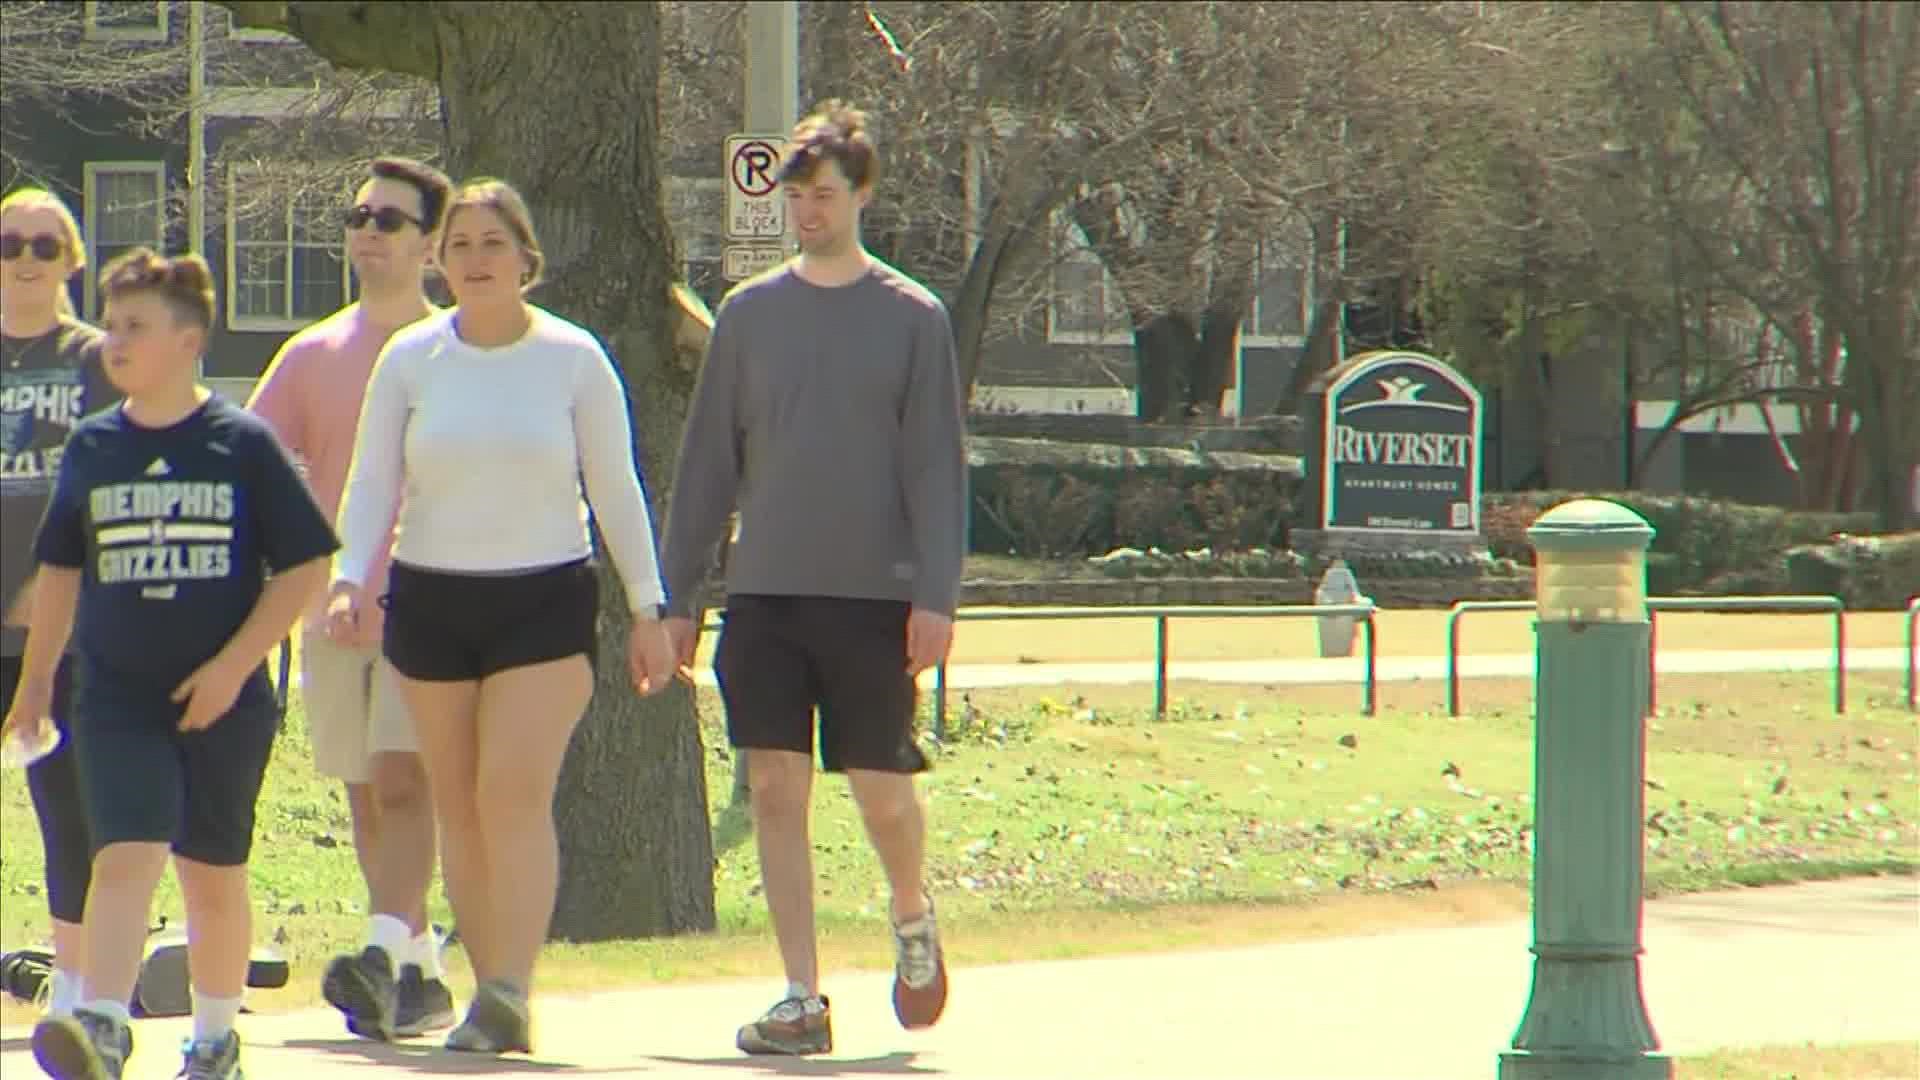 Organizers hope to make the three mile walk an annual tradition on the first day of spring.